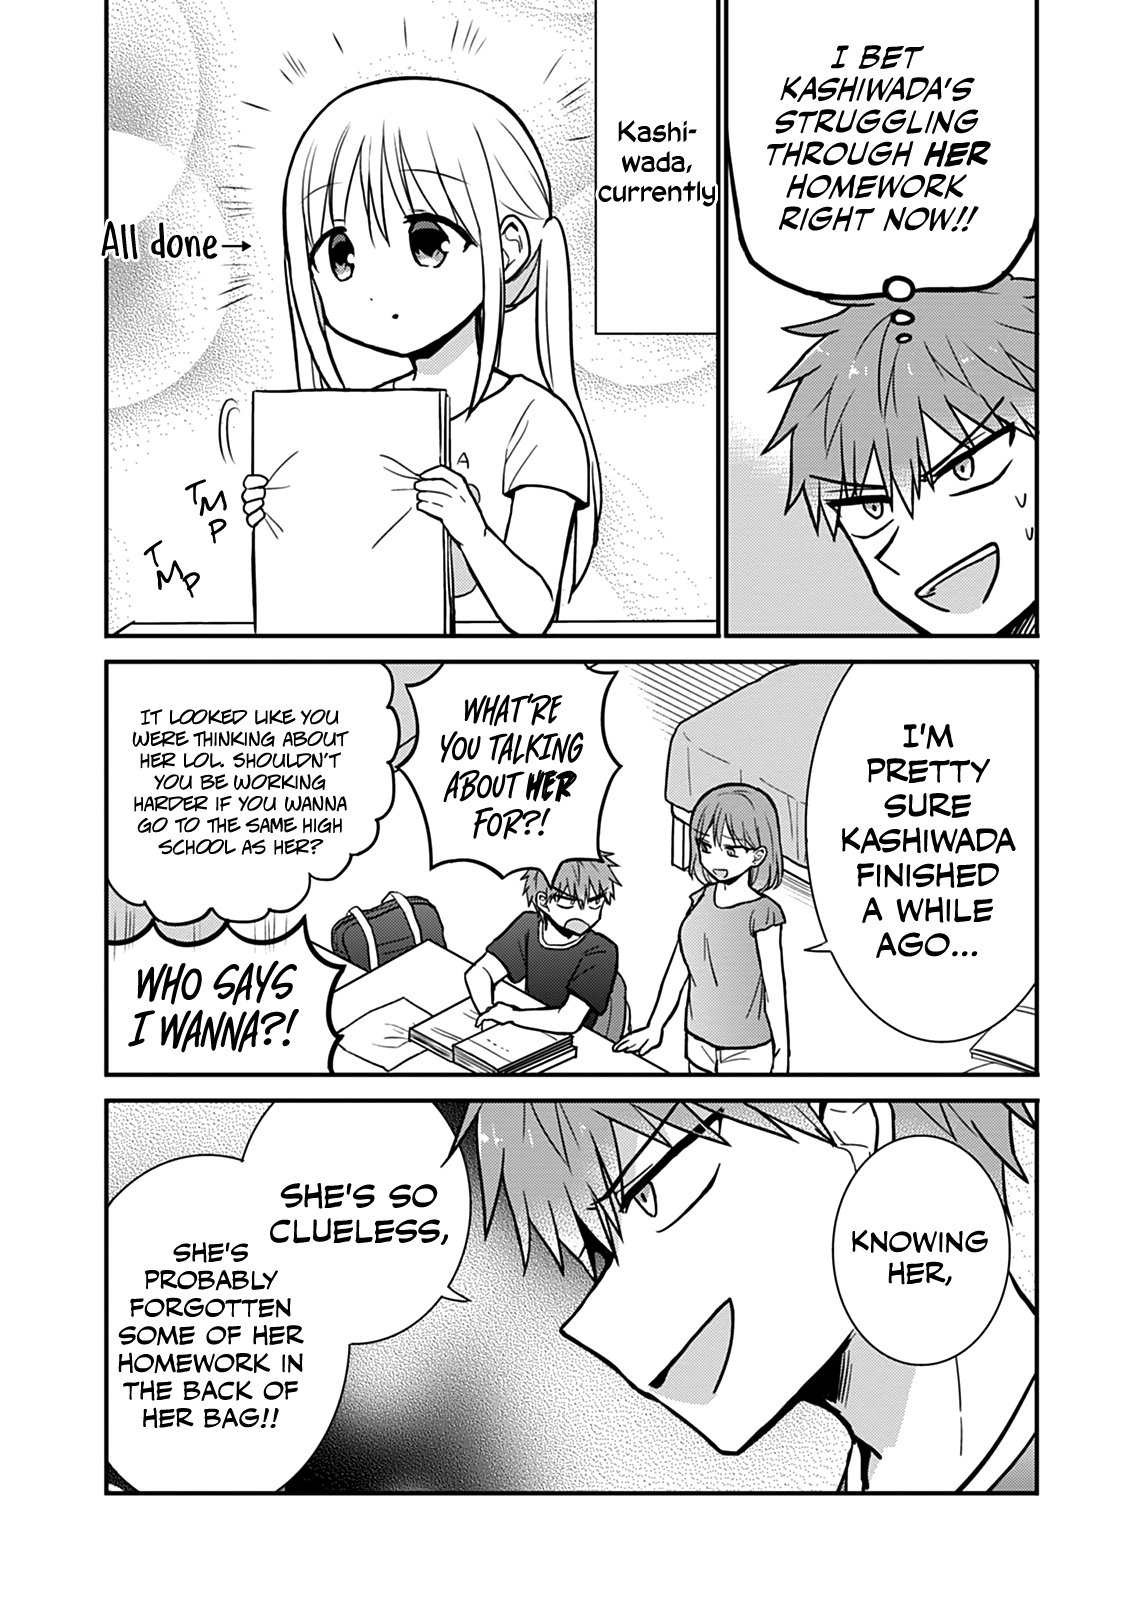 Expressionless Kashiwada-San And Emotional Oota-Kun Vol.3 Chapter 37.5: Kashiwada-San And Oota-Kun On The Night Before The New Semester - Picture 2